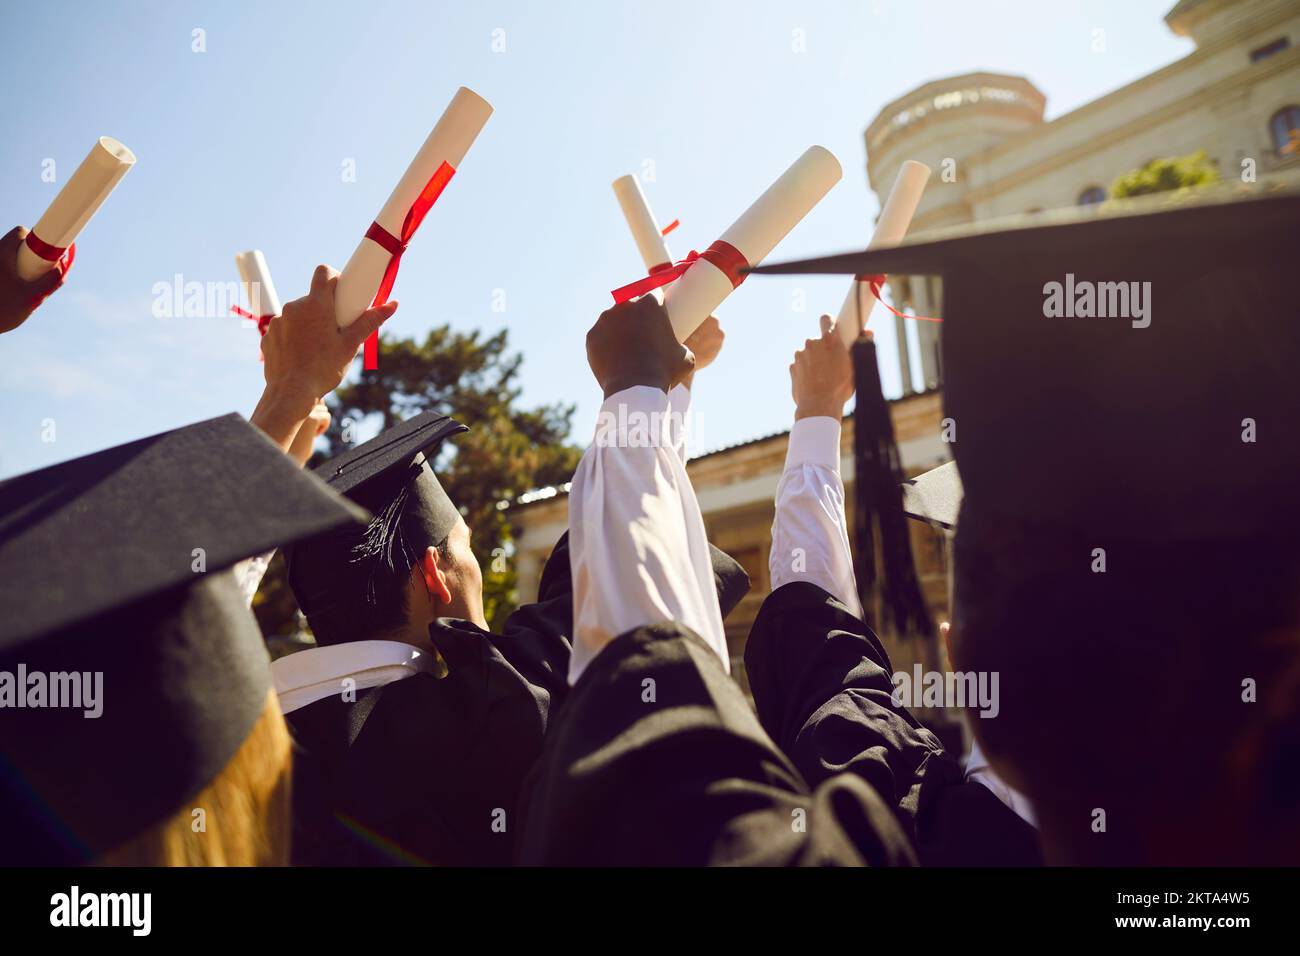 College or university graduates holding up their diplomas during graduation ceremony Stock Photo